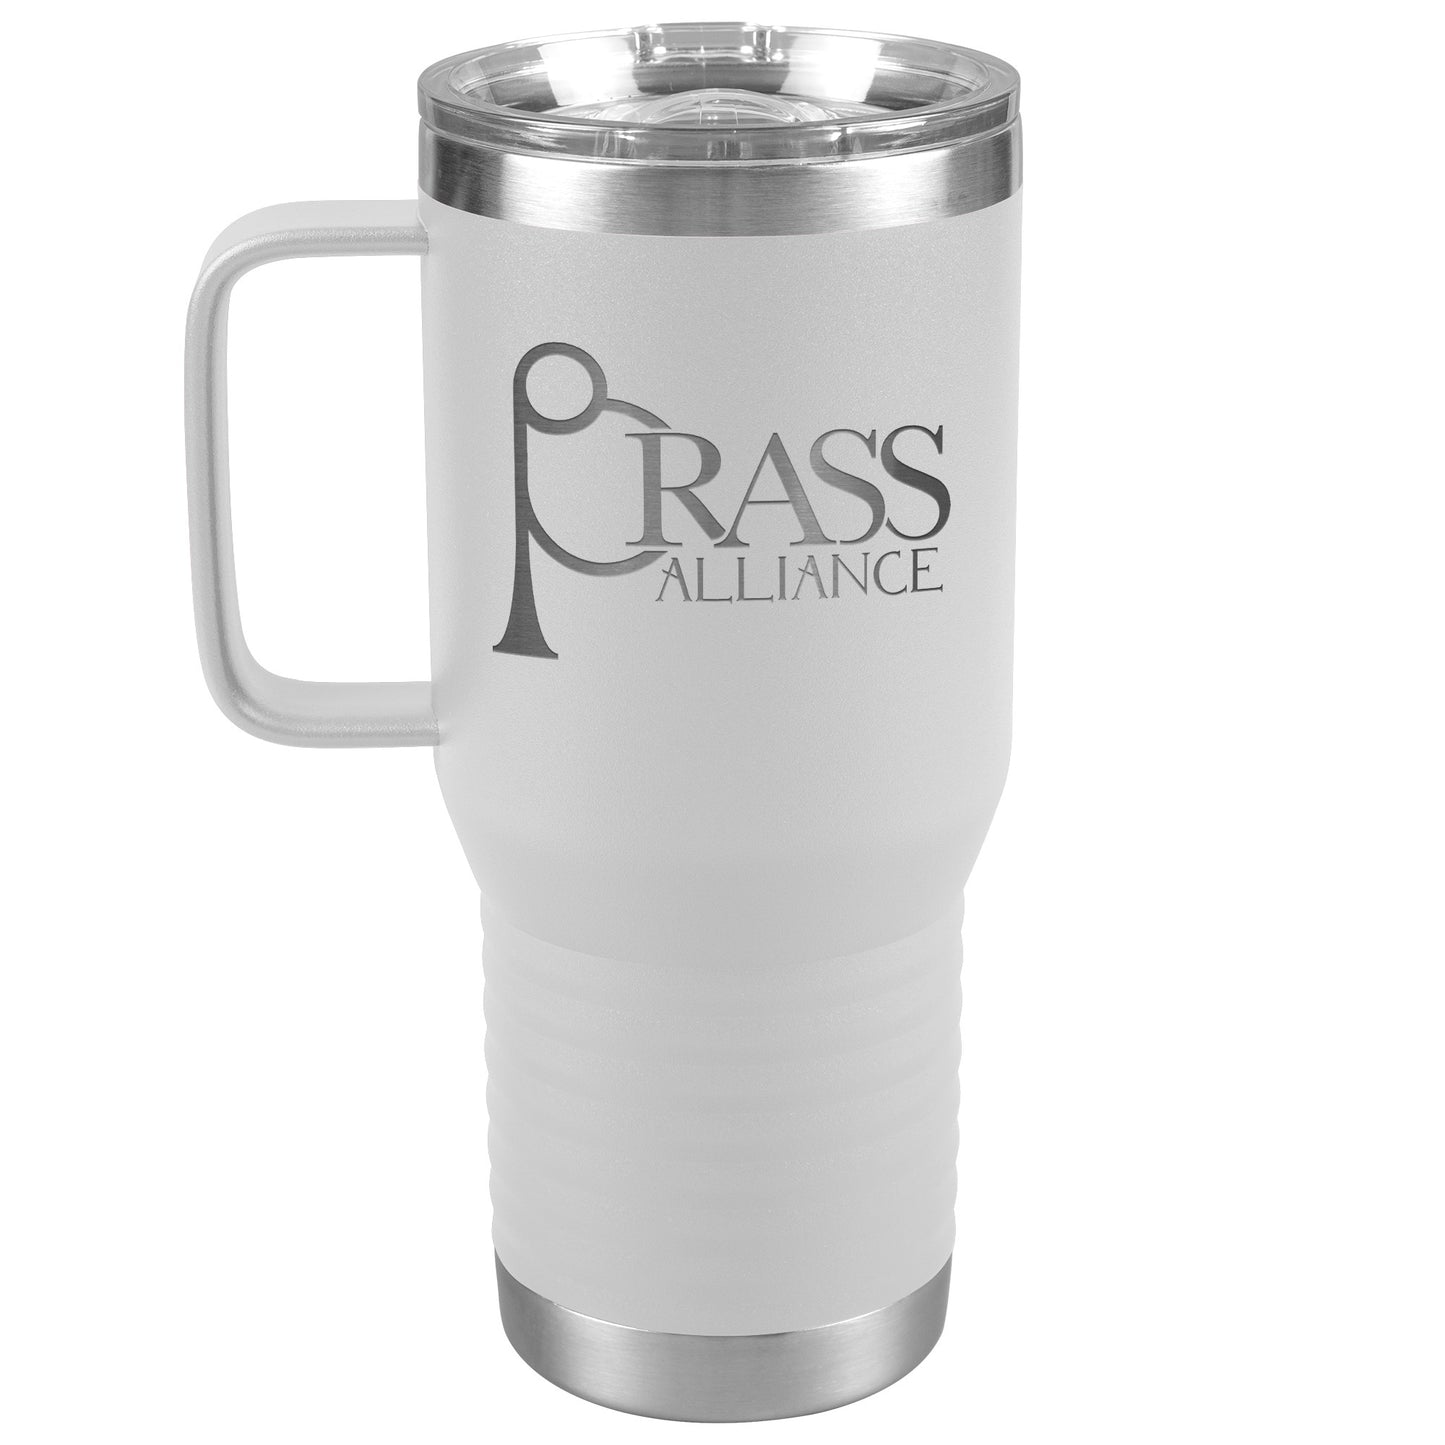 Brass Alliance Insulated Tumblers